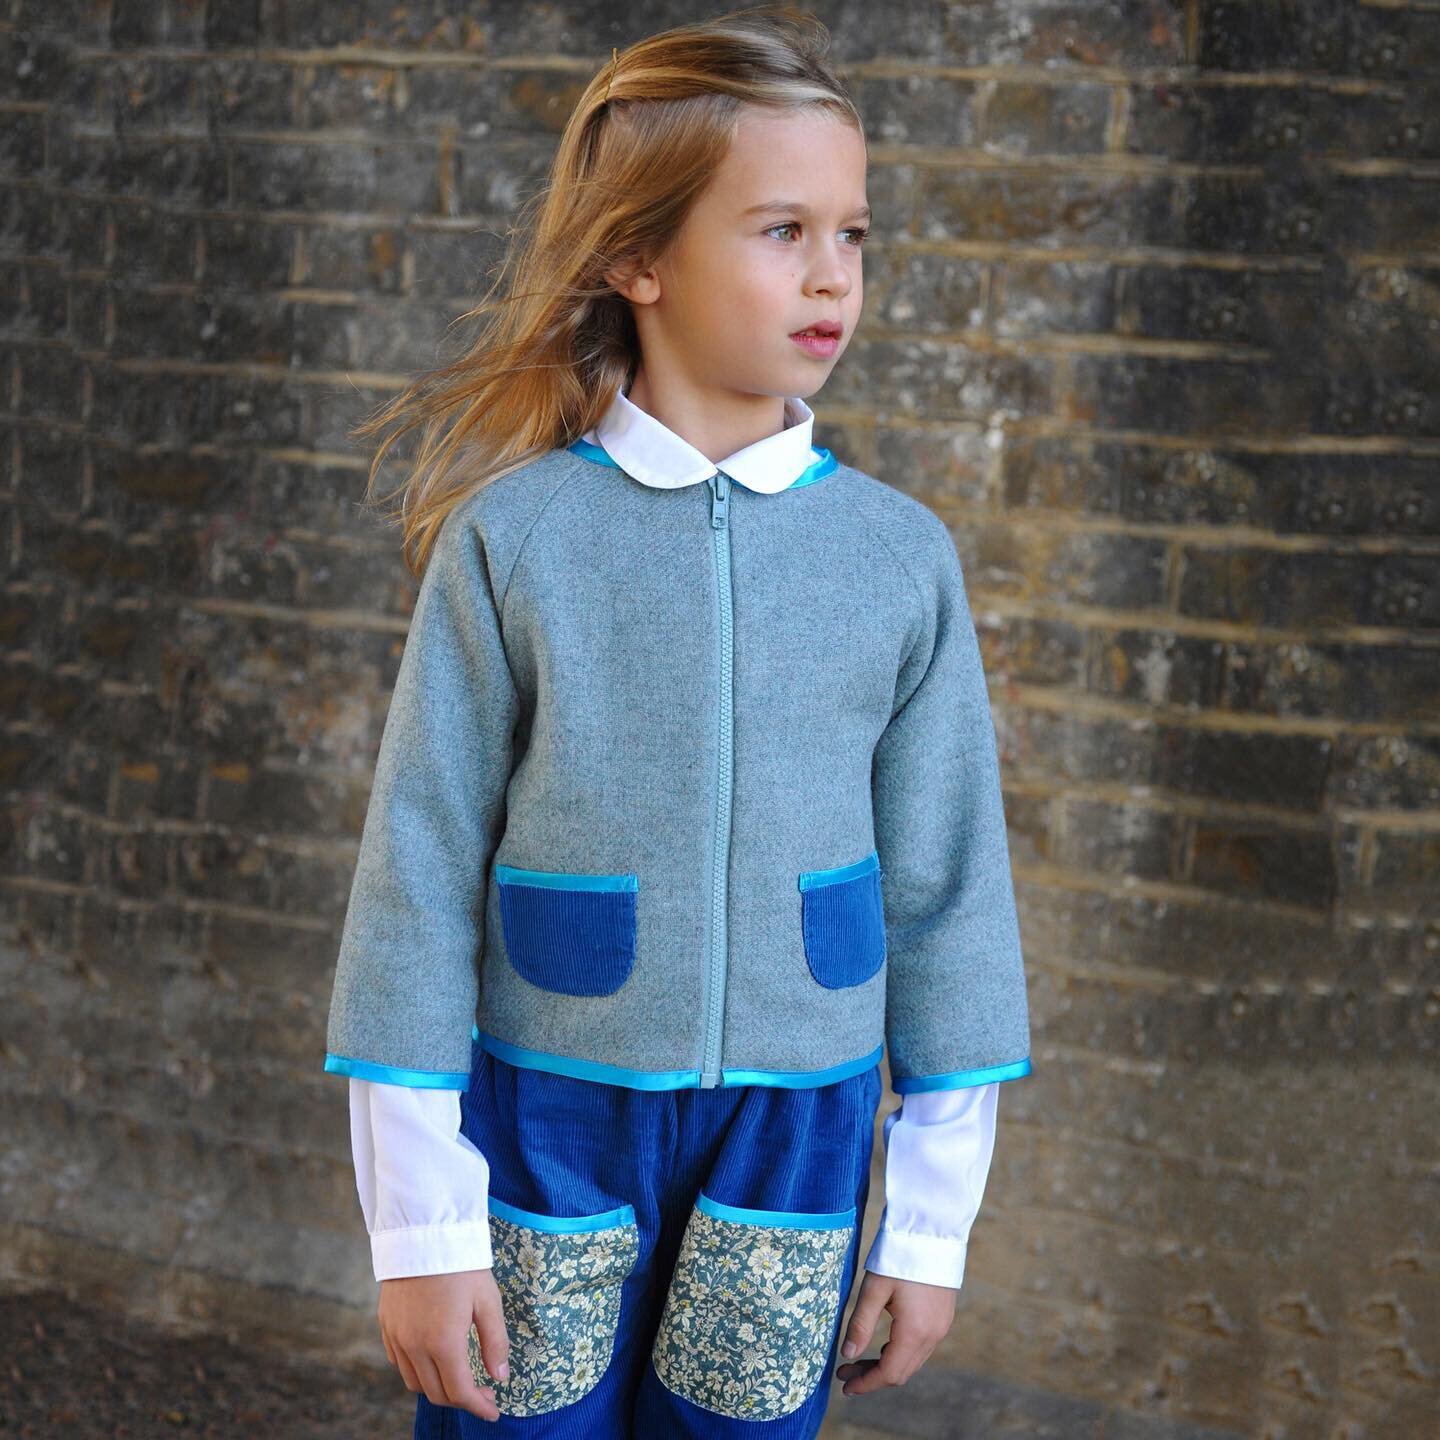 Happy December!
It&rsquo;s getting chilly out there ❄️ but you can keep the cold out with this gorgeous little zip through jacket. Lovely soft British wool and fully lined. Works for boys or girls!

#kidsjacket #britishwool #duckeggblue #kidsclothing